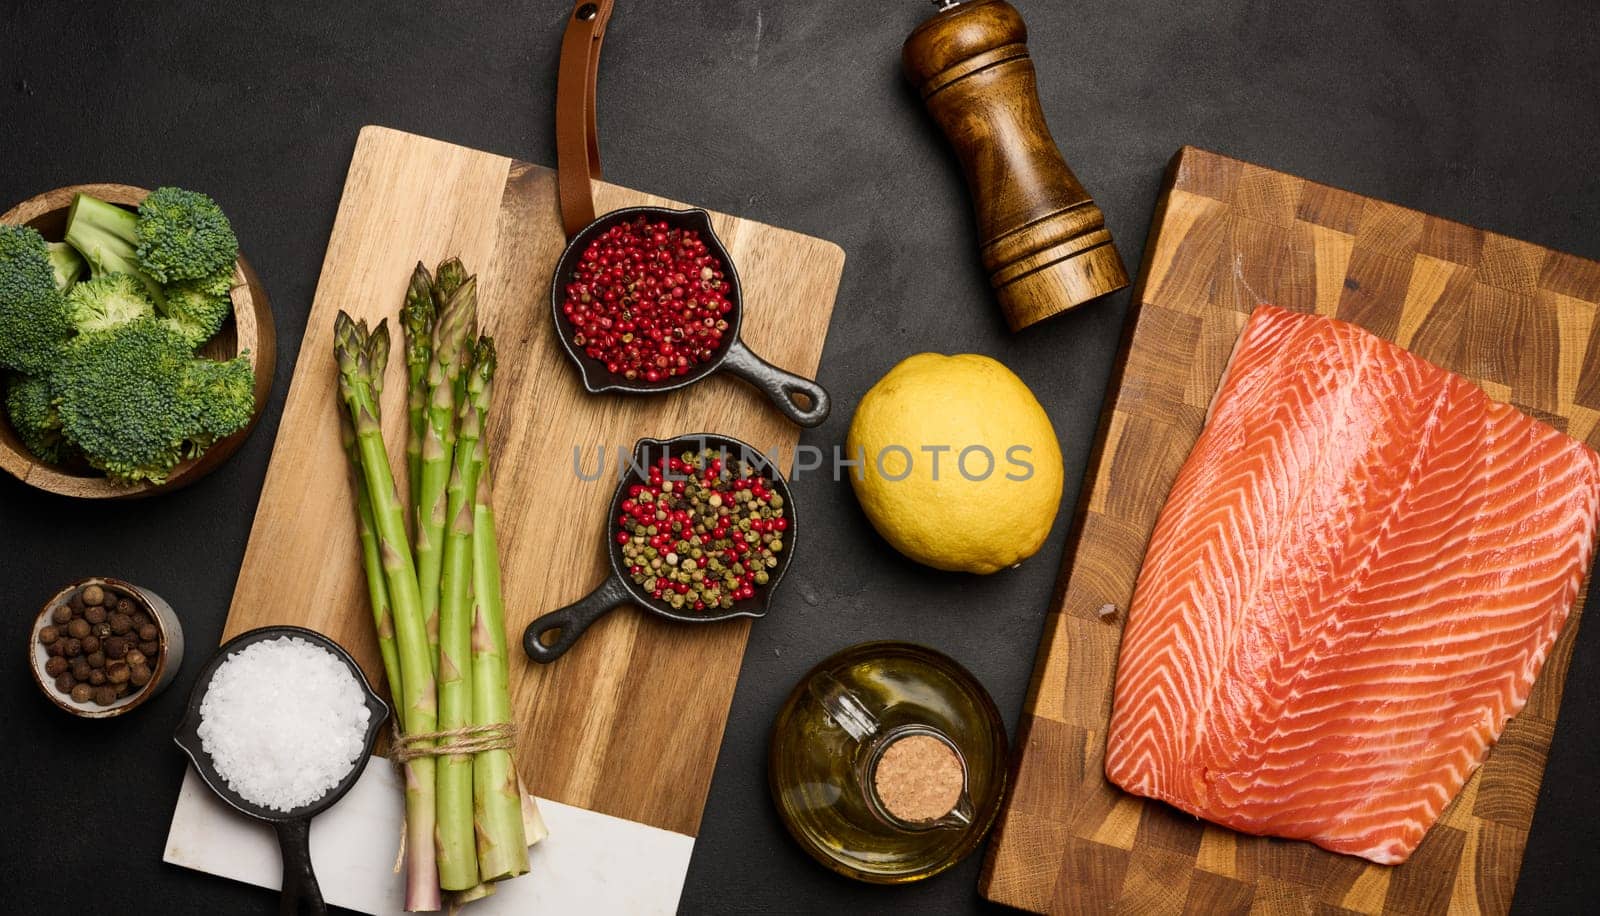 A piece of raw trout fillet on a wooden board, next to asparagus and broccoli. View from above